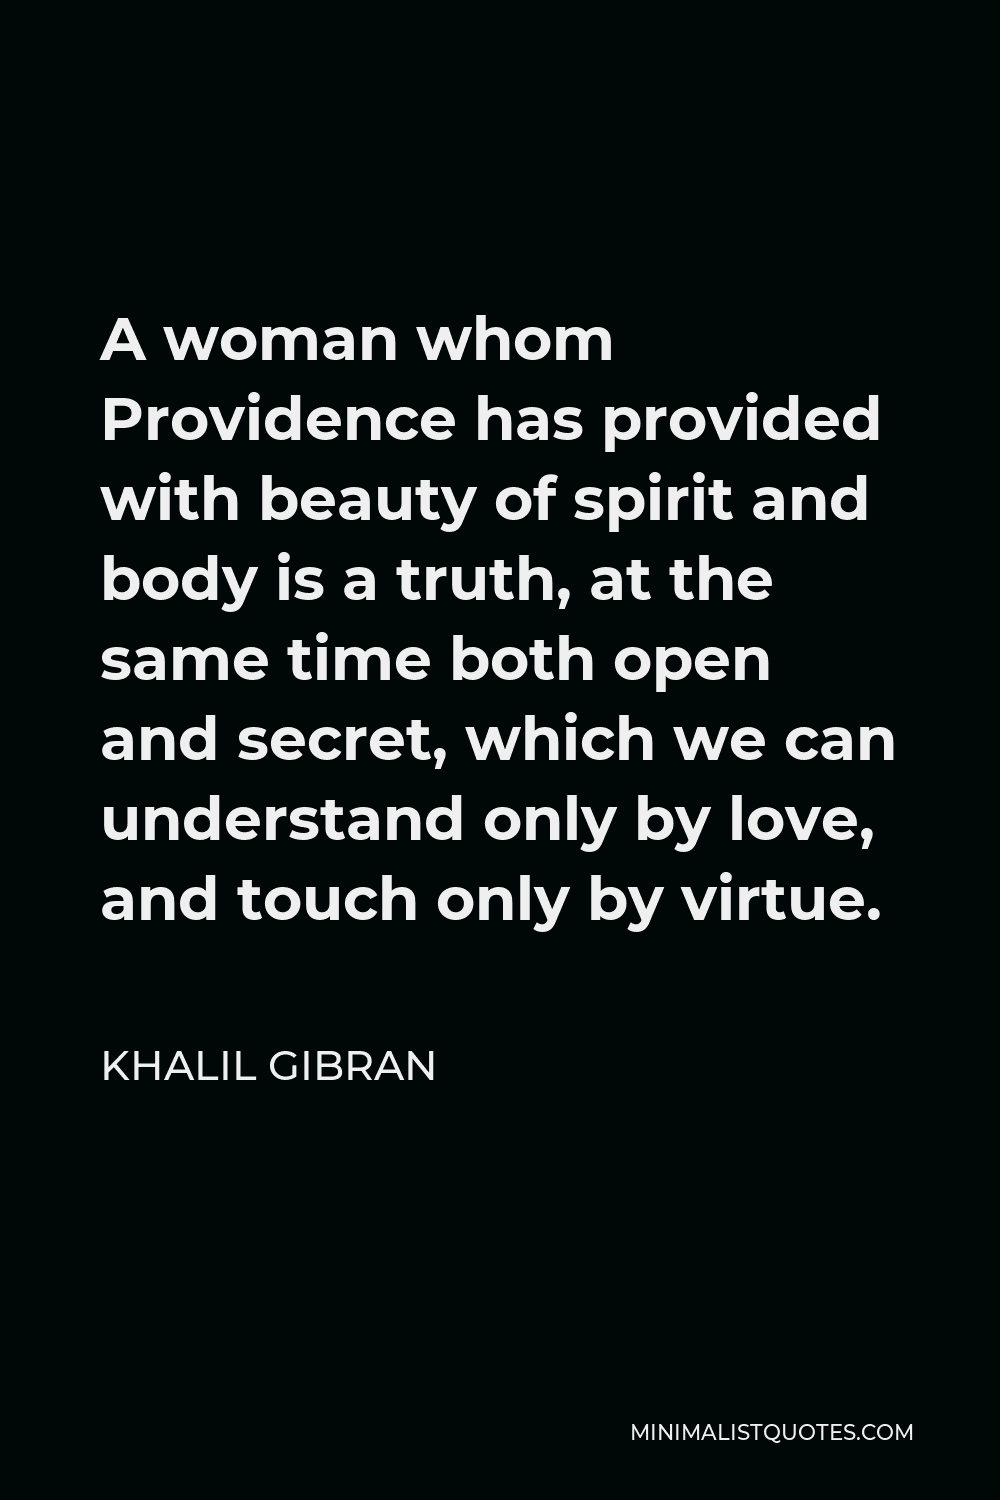 Khalil Gibran Quote - A woman whom Providence has provided with beauty of spirit and body is a truth, at the same time both open and secret, which we can understand only by love, and touch only by virtue.